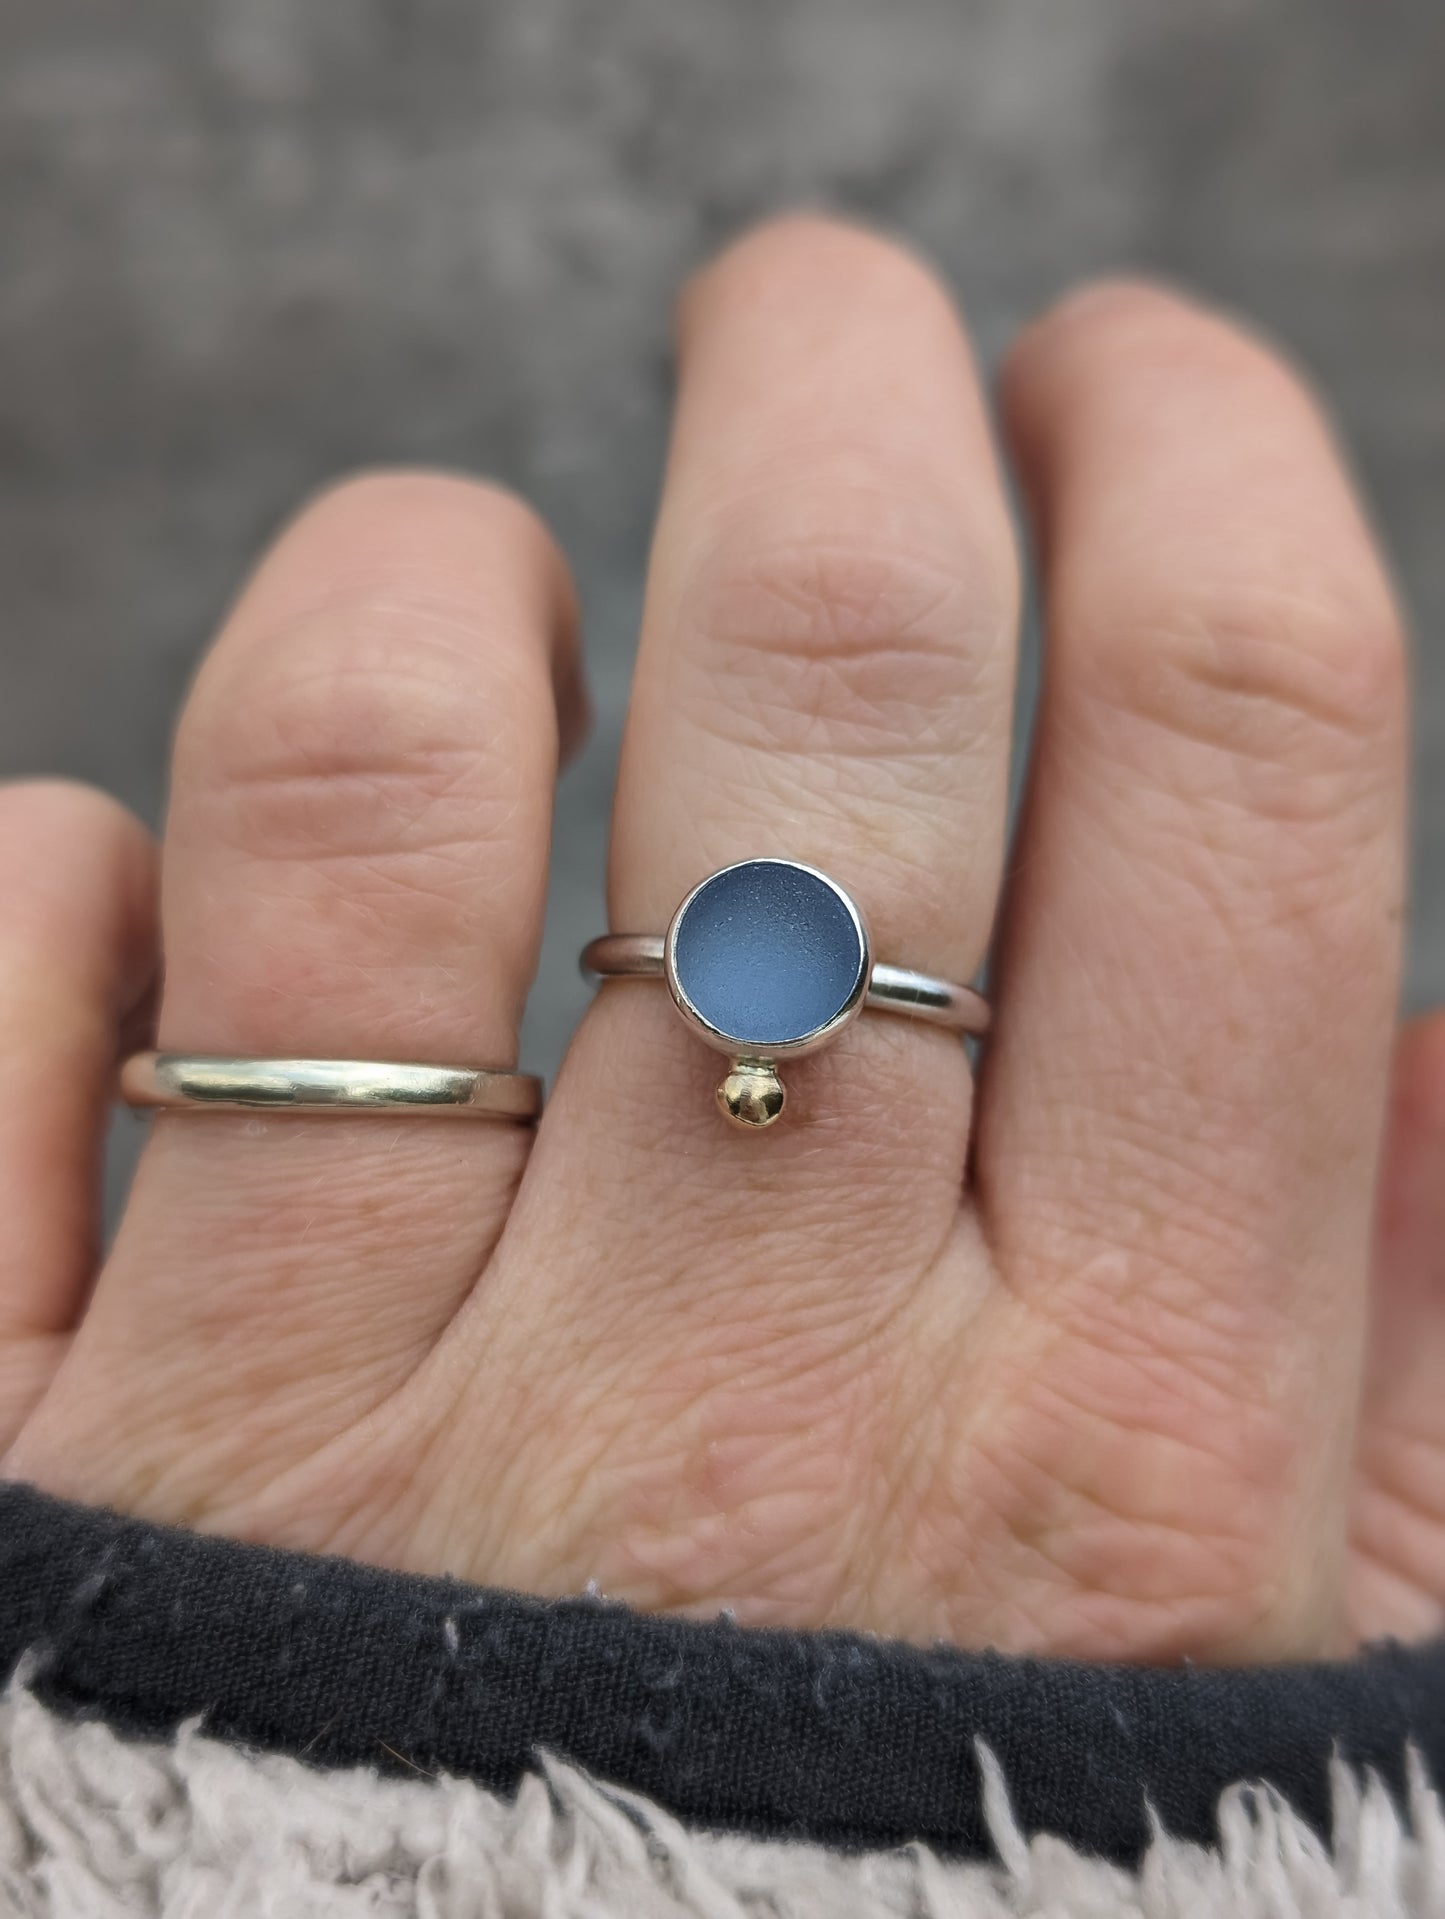 Cornflower blue seaglass ring with 9ct gold